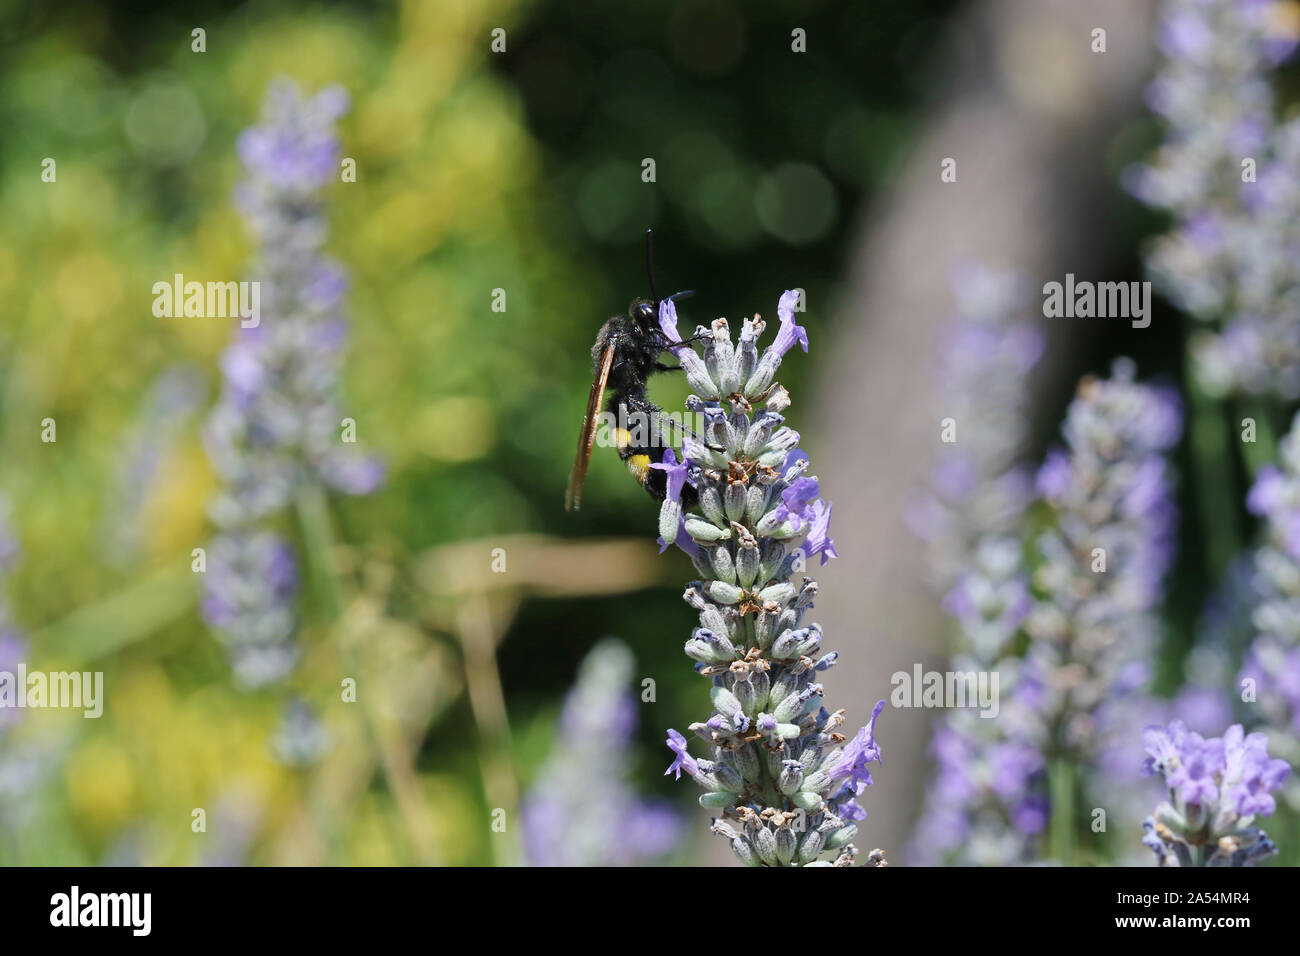 mammoth wasp Latin megascolia maculata family scoliidae largest wasp in Europe this is a male with a black head feeding on a lavender flower in Italy Stock Photo